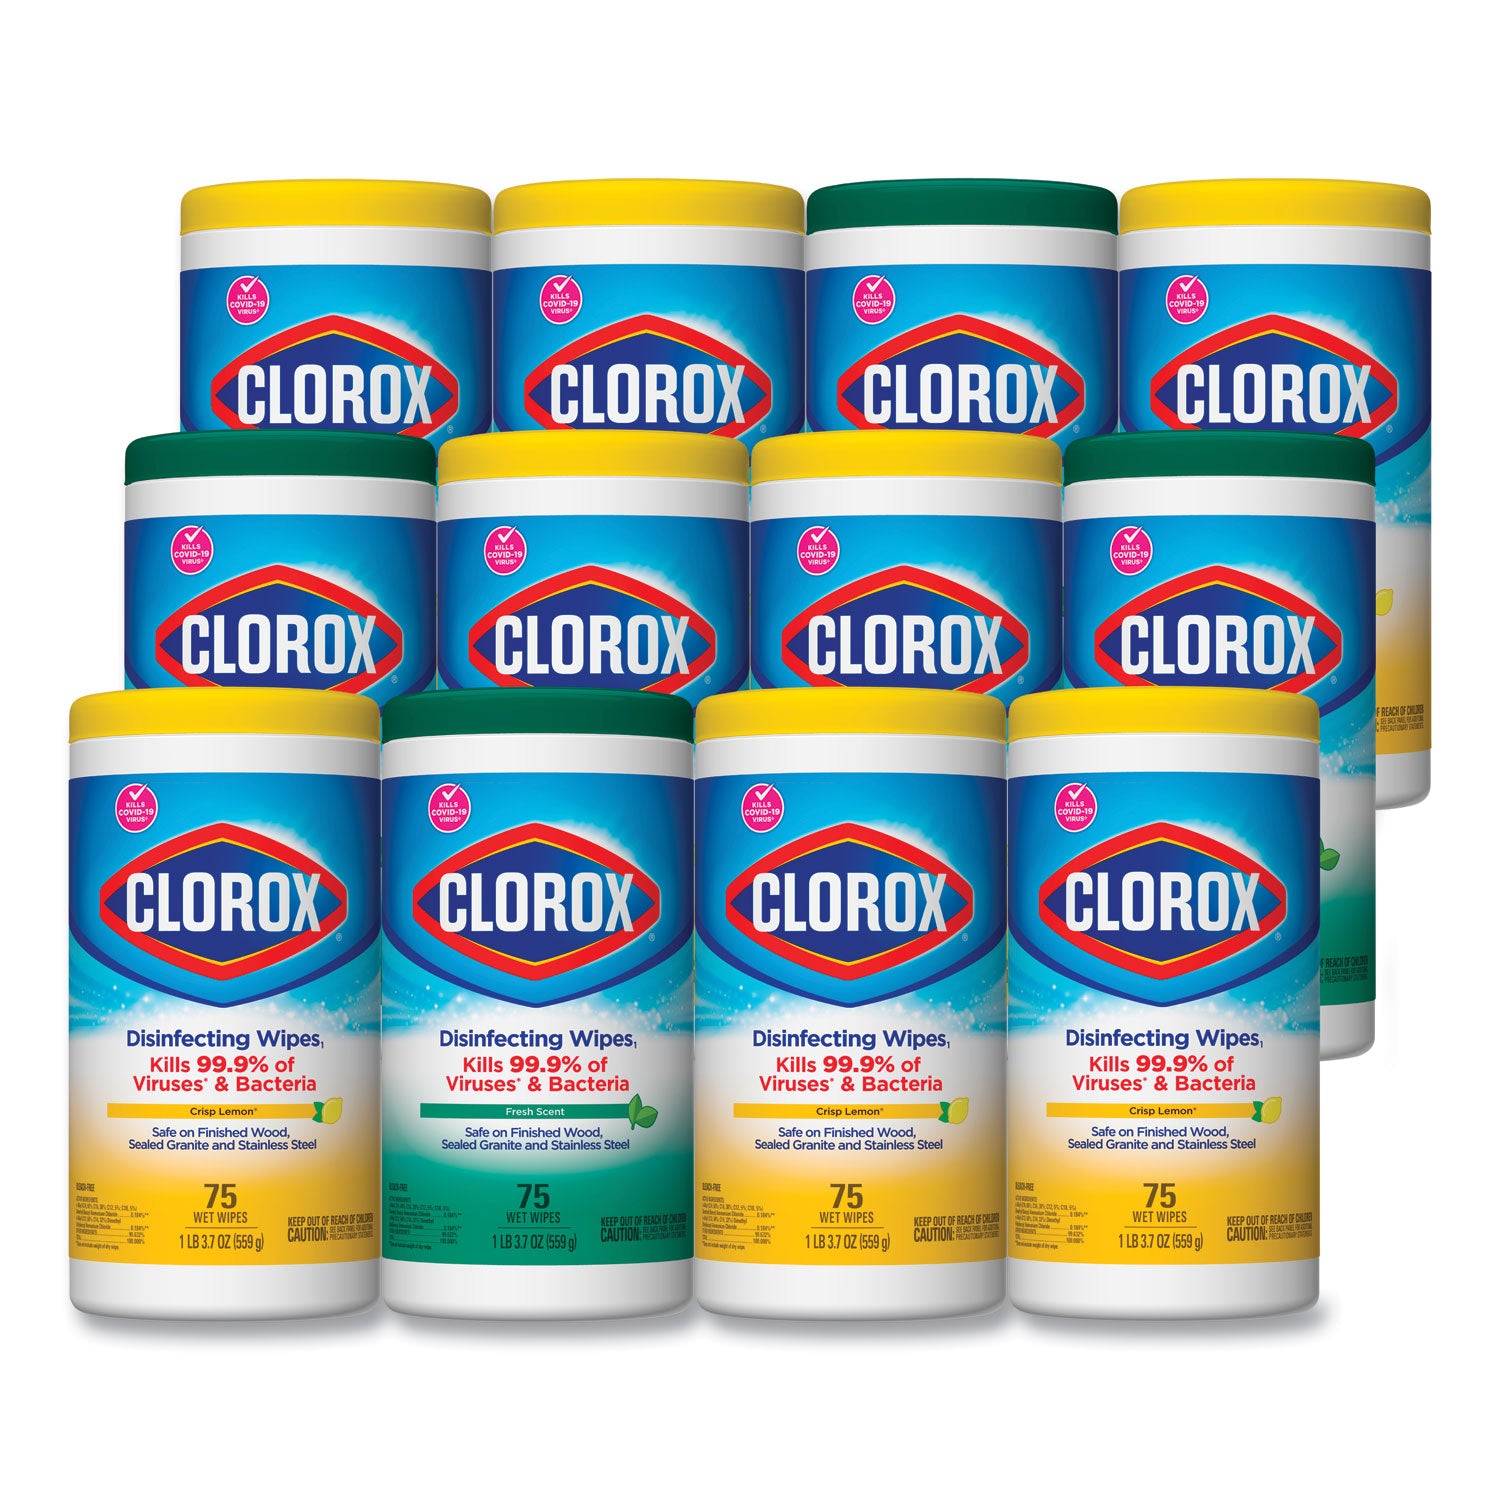 disinfecting-wipes-1-ply-7-x-8-fresh-scent-citrus-blend-white-75-canister-3-pack-4-packs-carton_clo30208 - 1